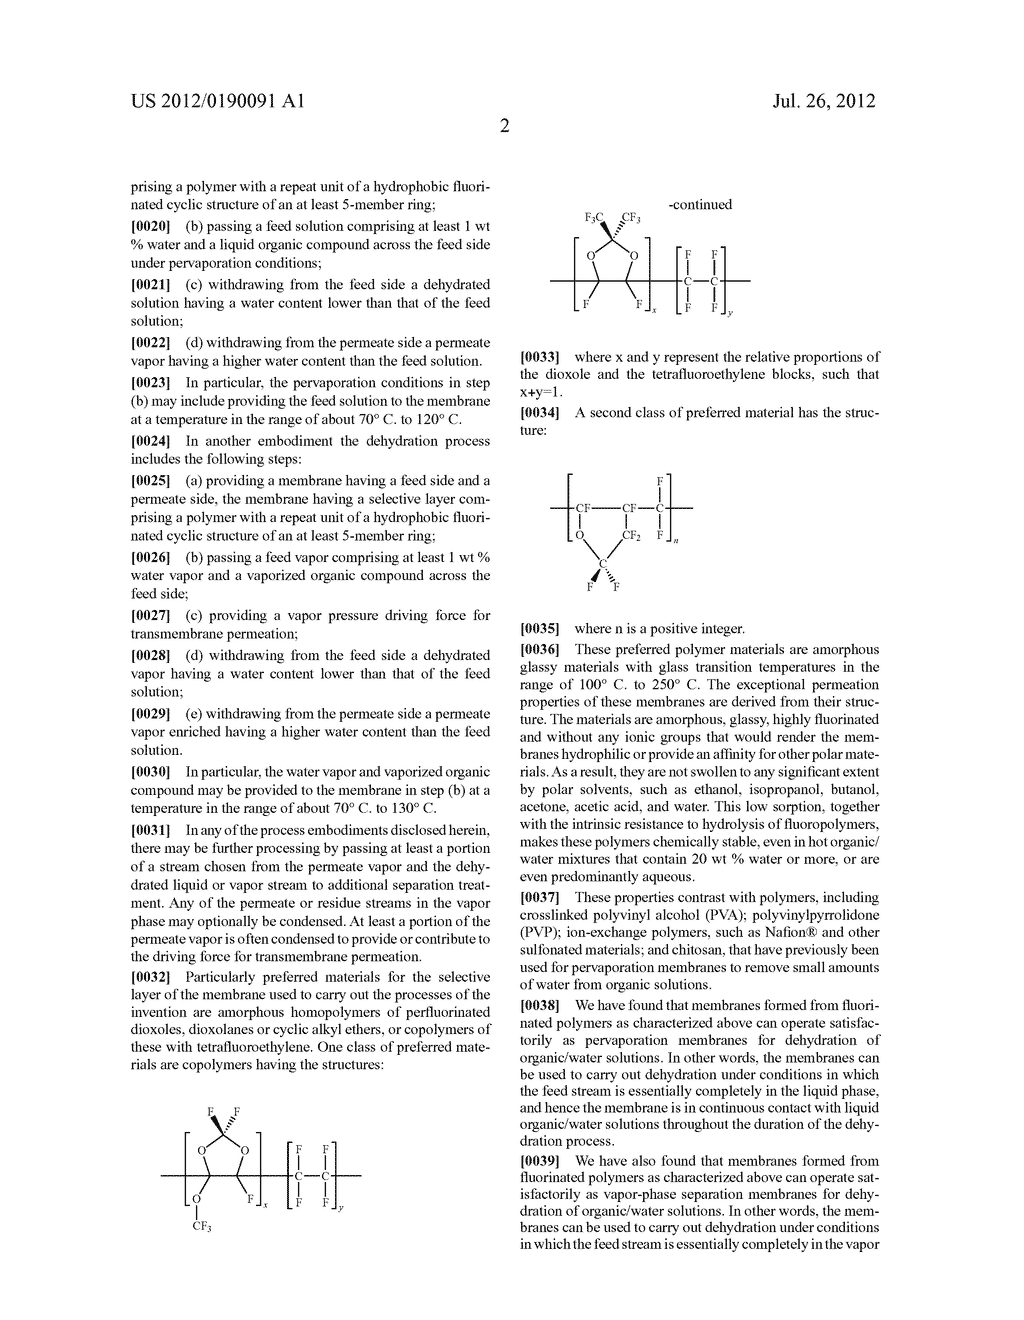 LIQUID-PHASE AND VAPOR-PHASE DEHYDRATION OF ORGANIC / WATER SOLUTIONS - diagram, schematic, and image 17